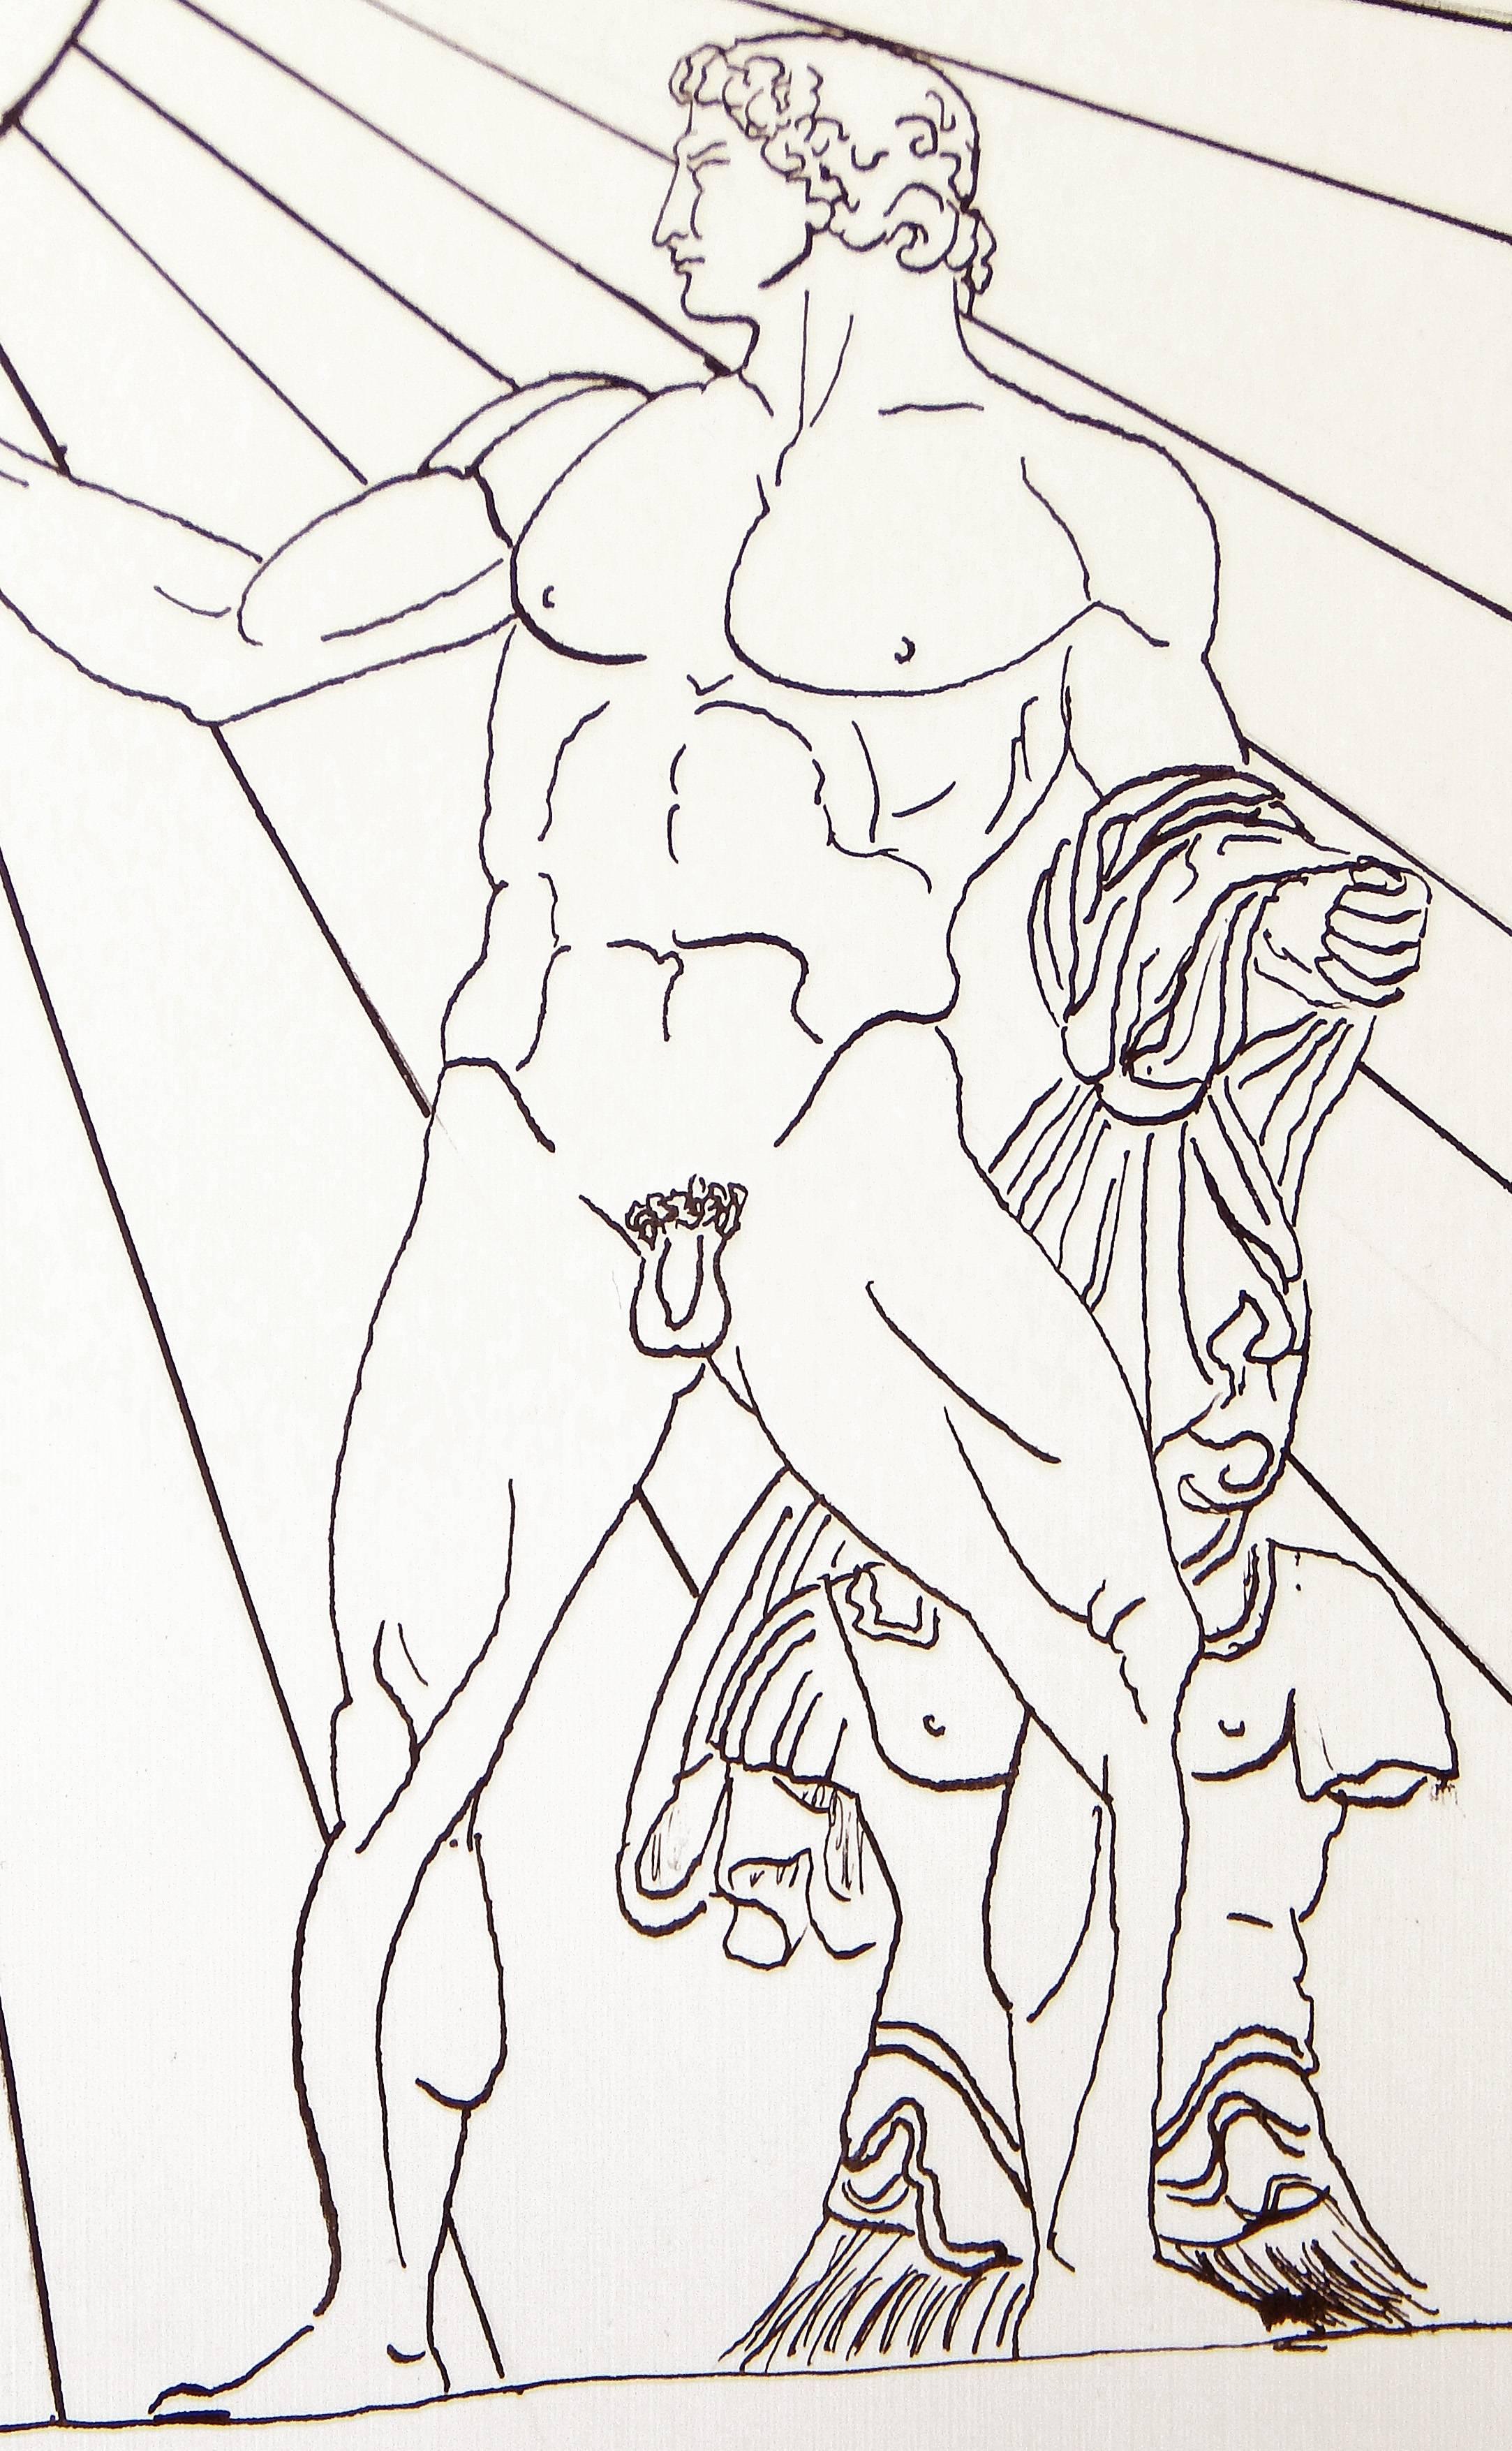 An excellent example of the fascination with Classical subjects among artists in the Art Deco era, this drawing depicts a nude Roman soldier holding his cape in one arm and gesturing toward the sun, with his armor resting on the floor behind him.